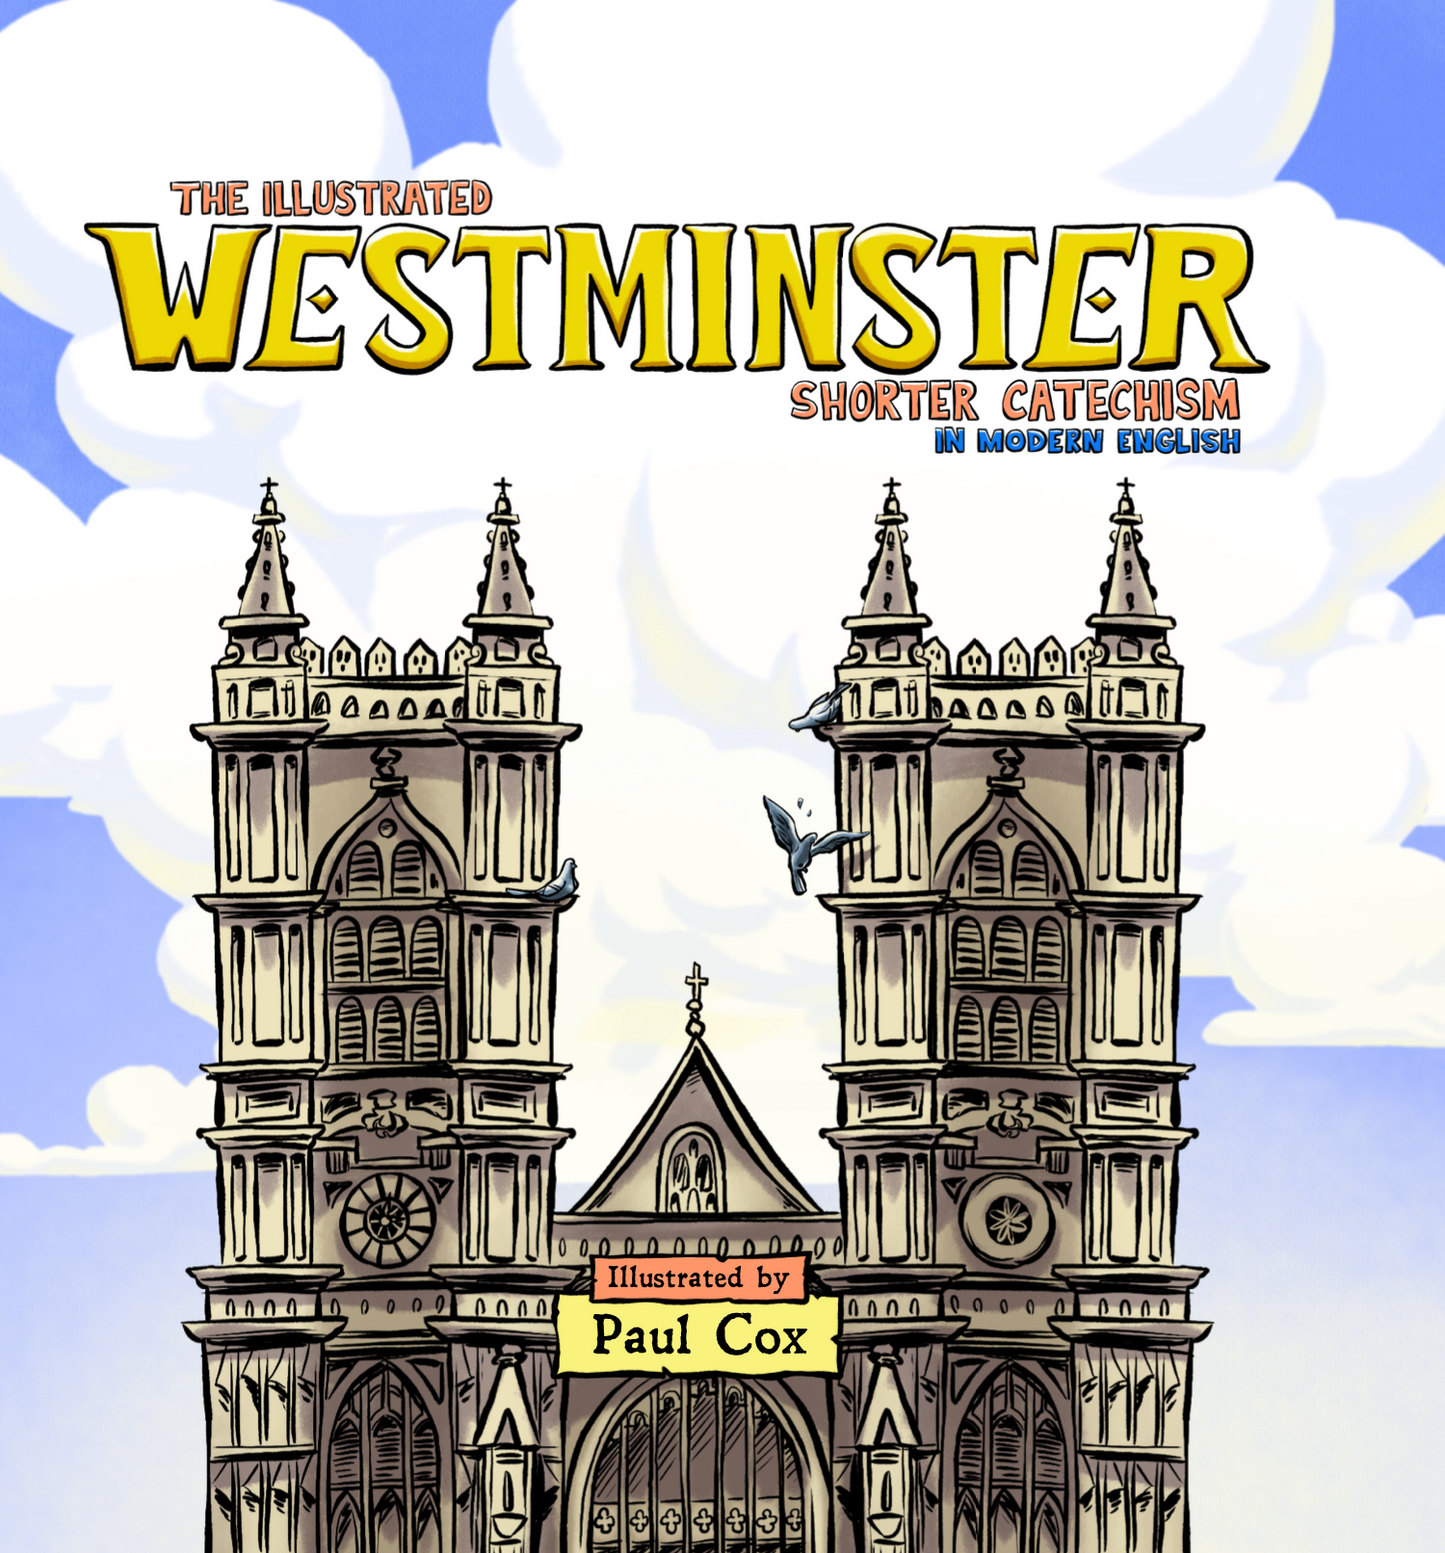 The Illustrated Westminster Catechism (Modern English Text)